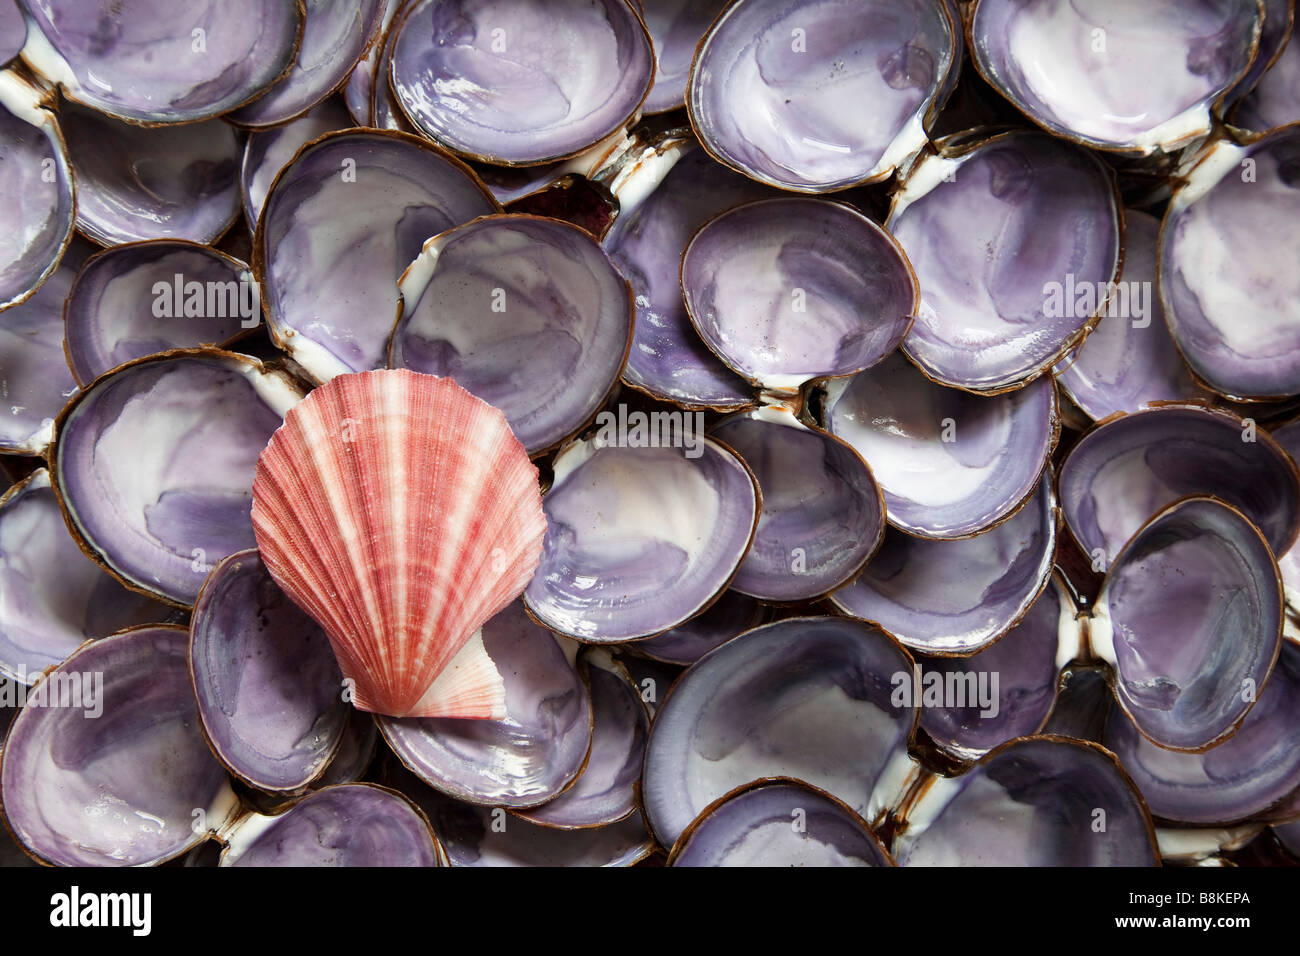 Scallop Shell and Clam Shells Stock Photo